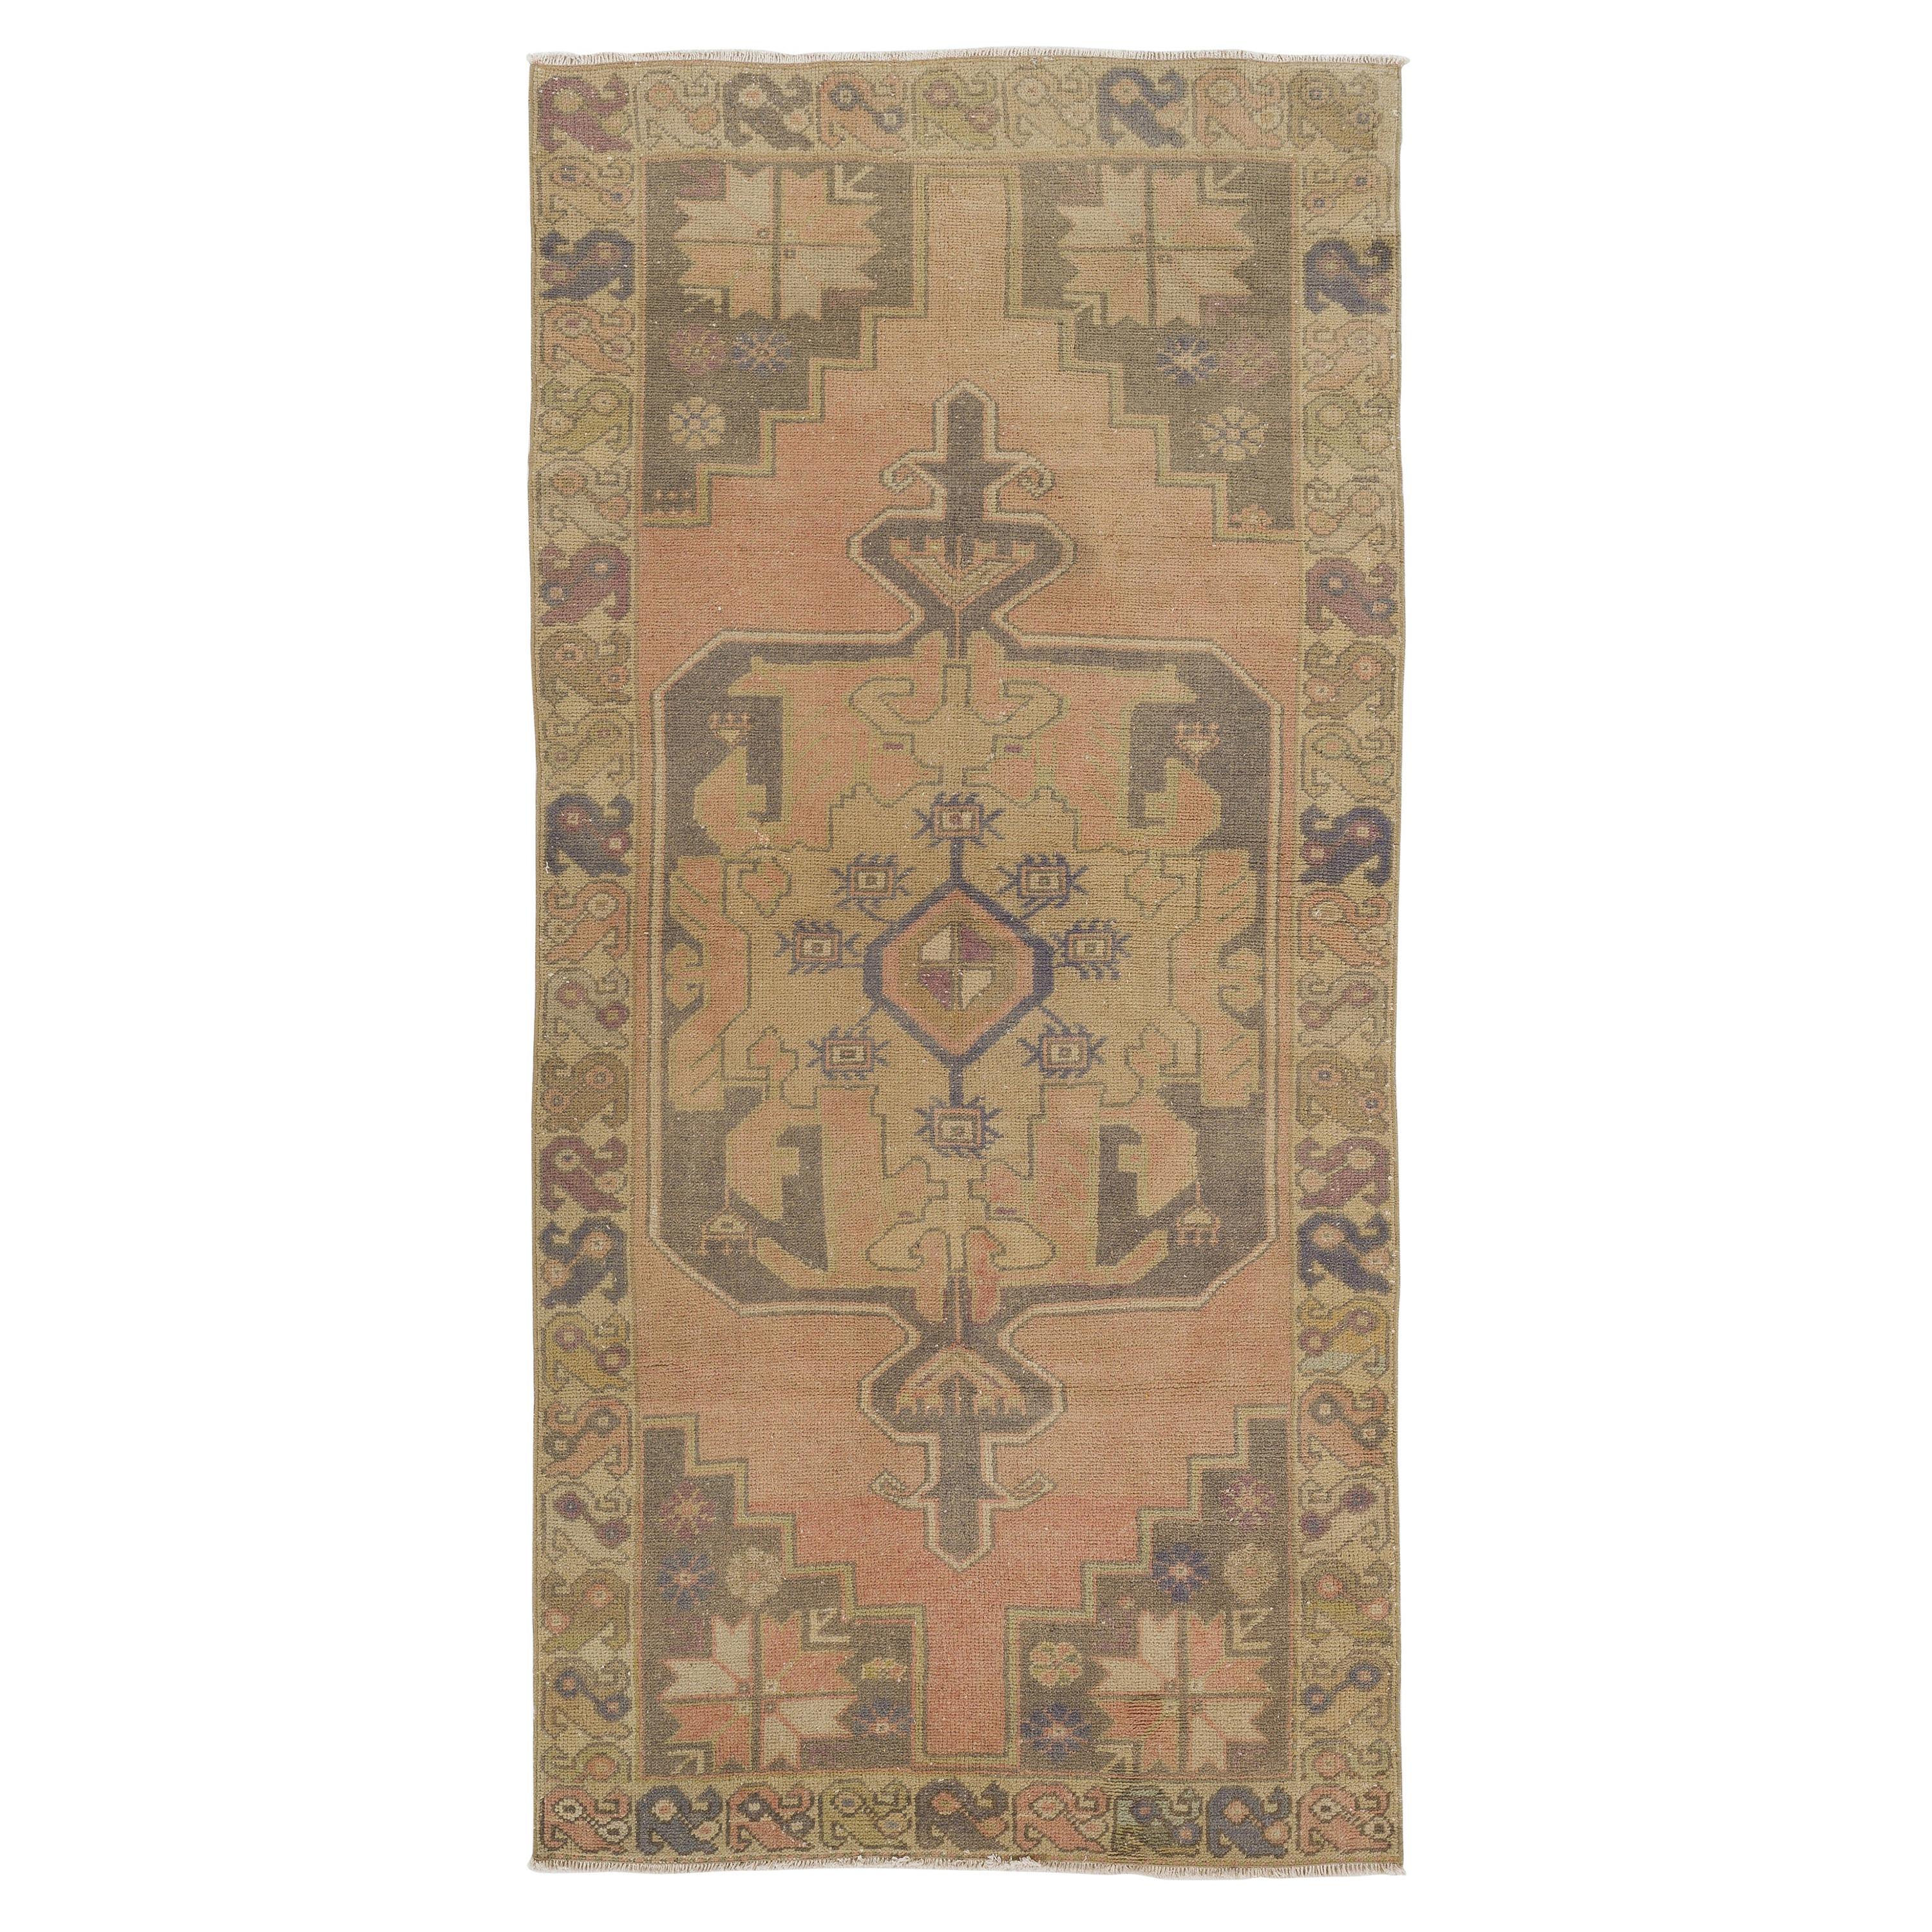 4x8.3 Ft One-of-a-Kind Vintage Turkish Oushak Rug in Soft Colors, All Wool For Sale